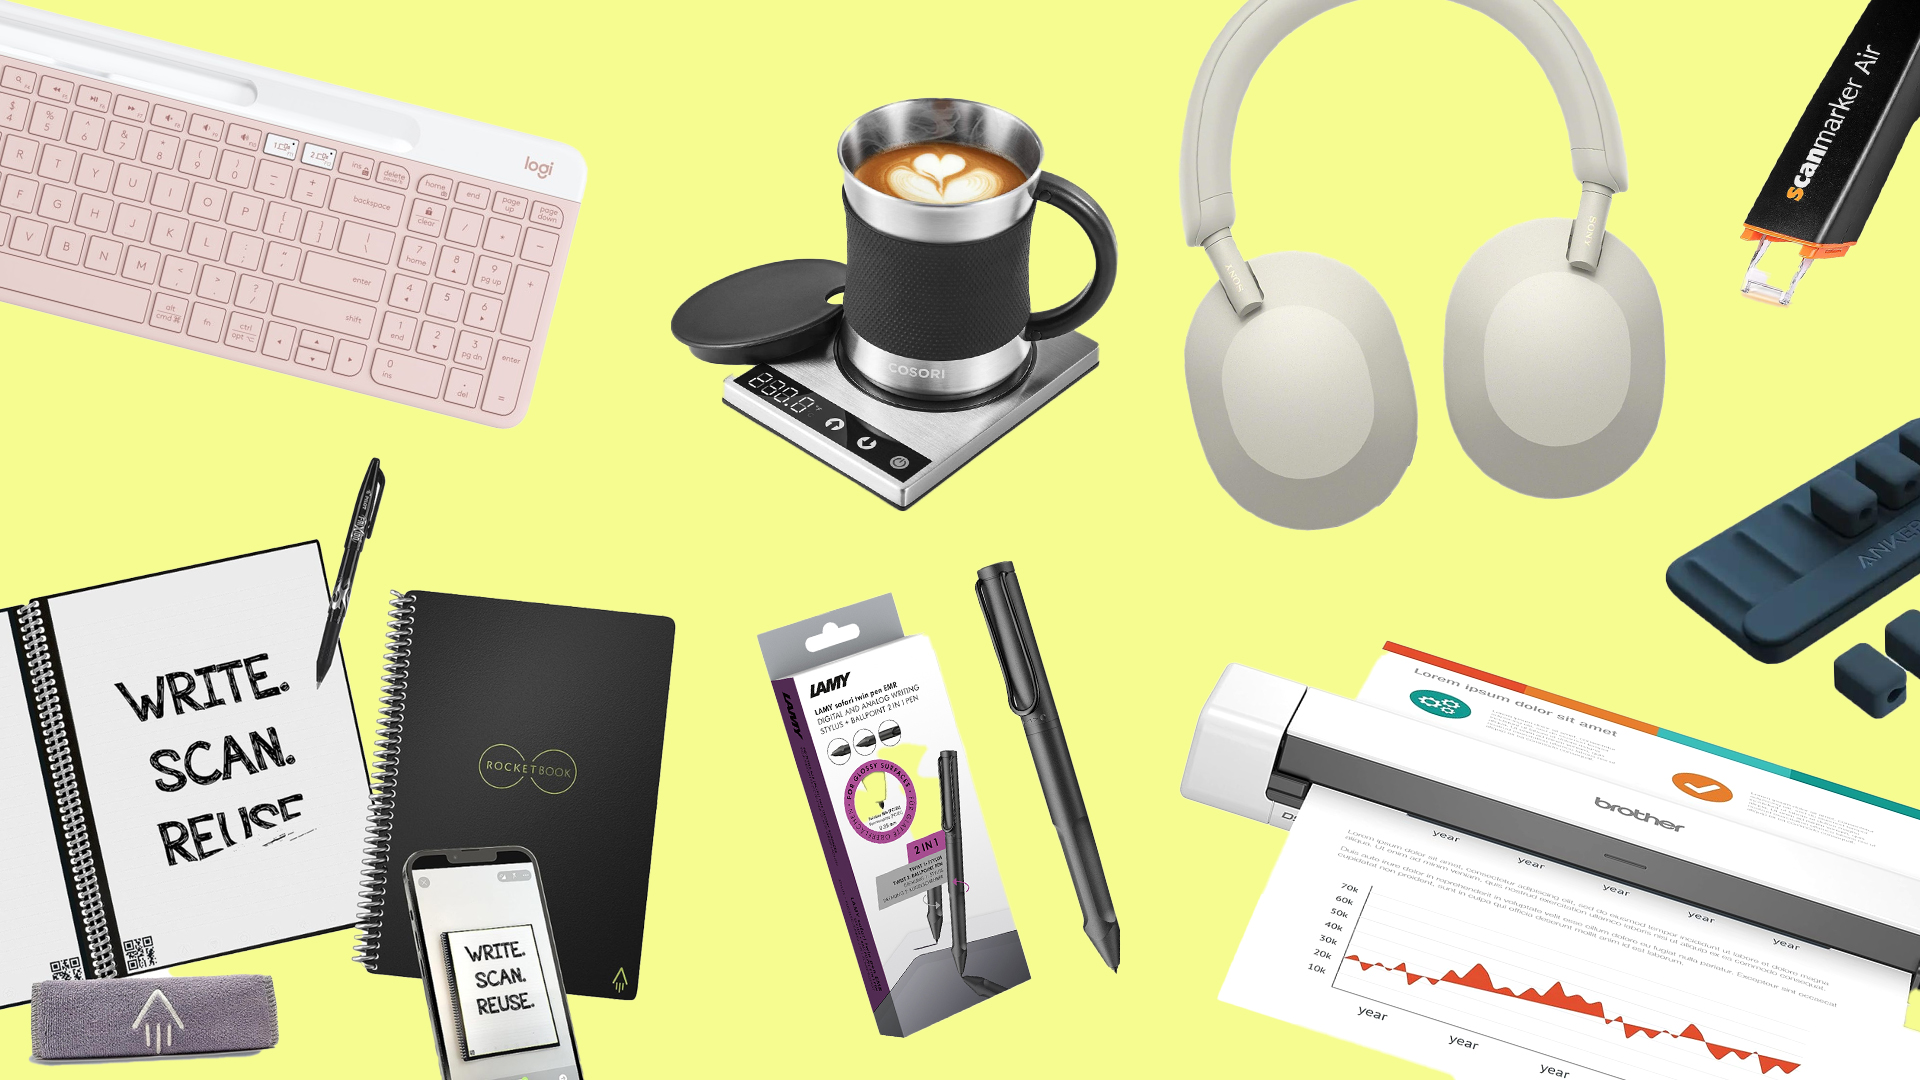 Digital Notebooks, Noise-Cancelling Headphones & More Cool Gadgets To Help  Save You Time At Work - 8days